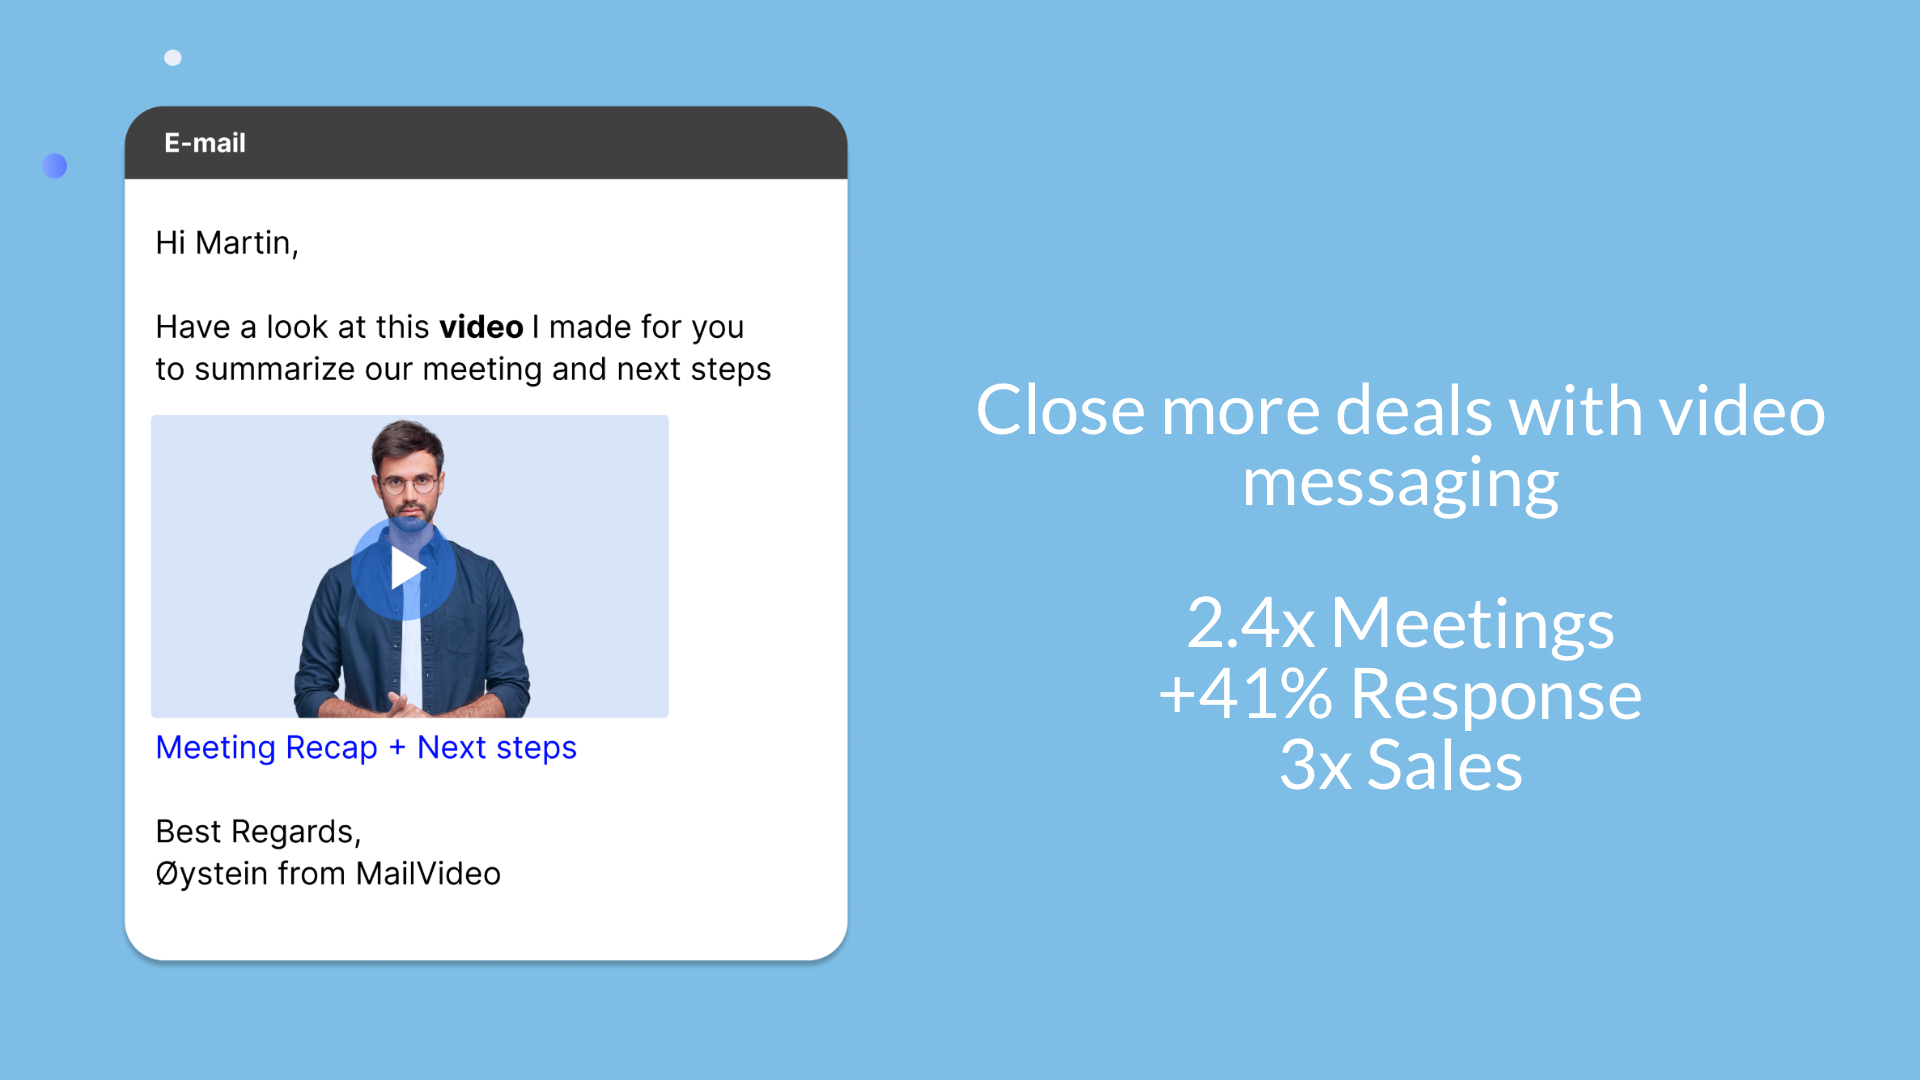 Close more deals with video messaging